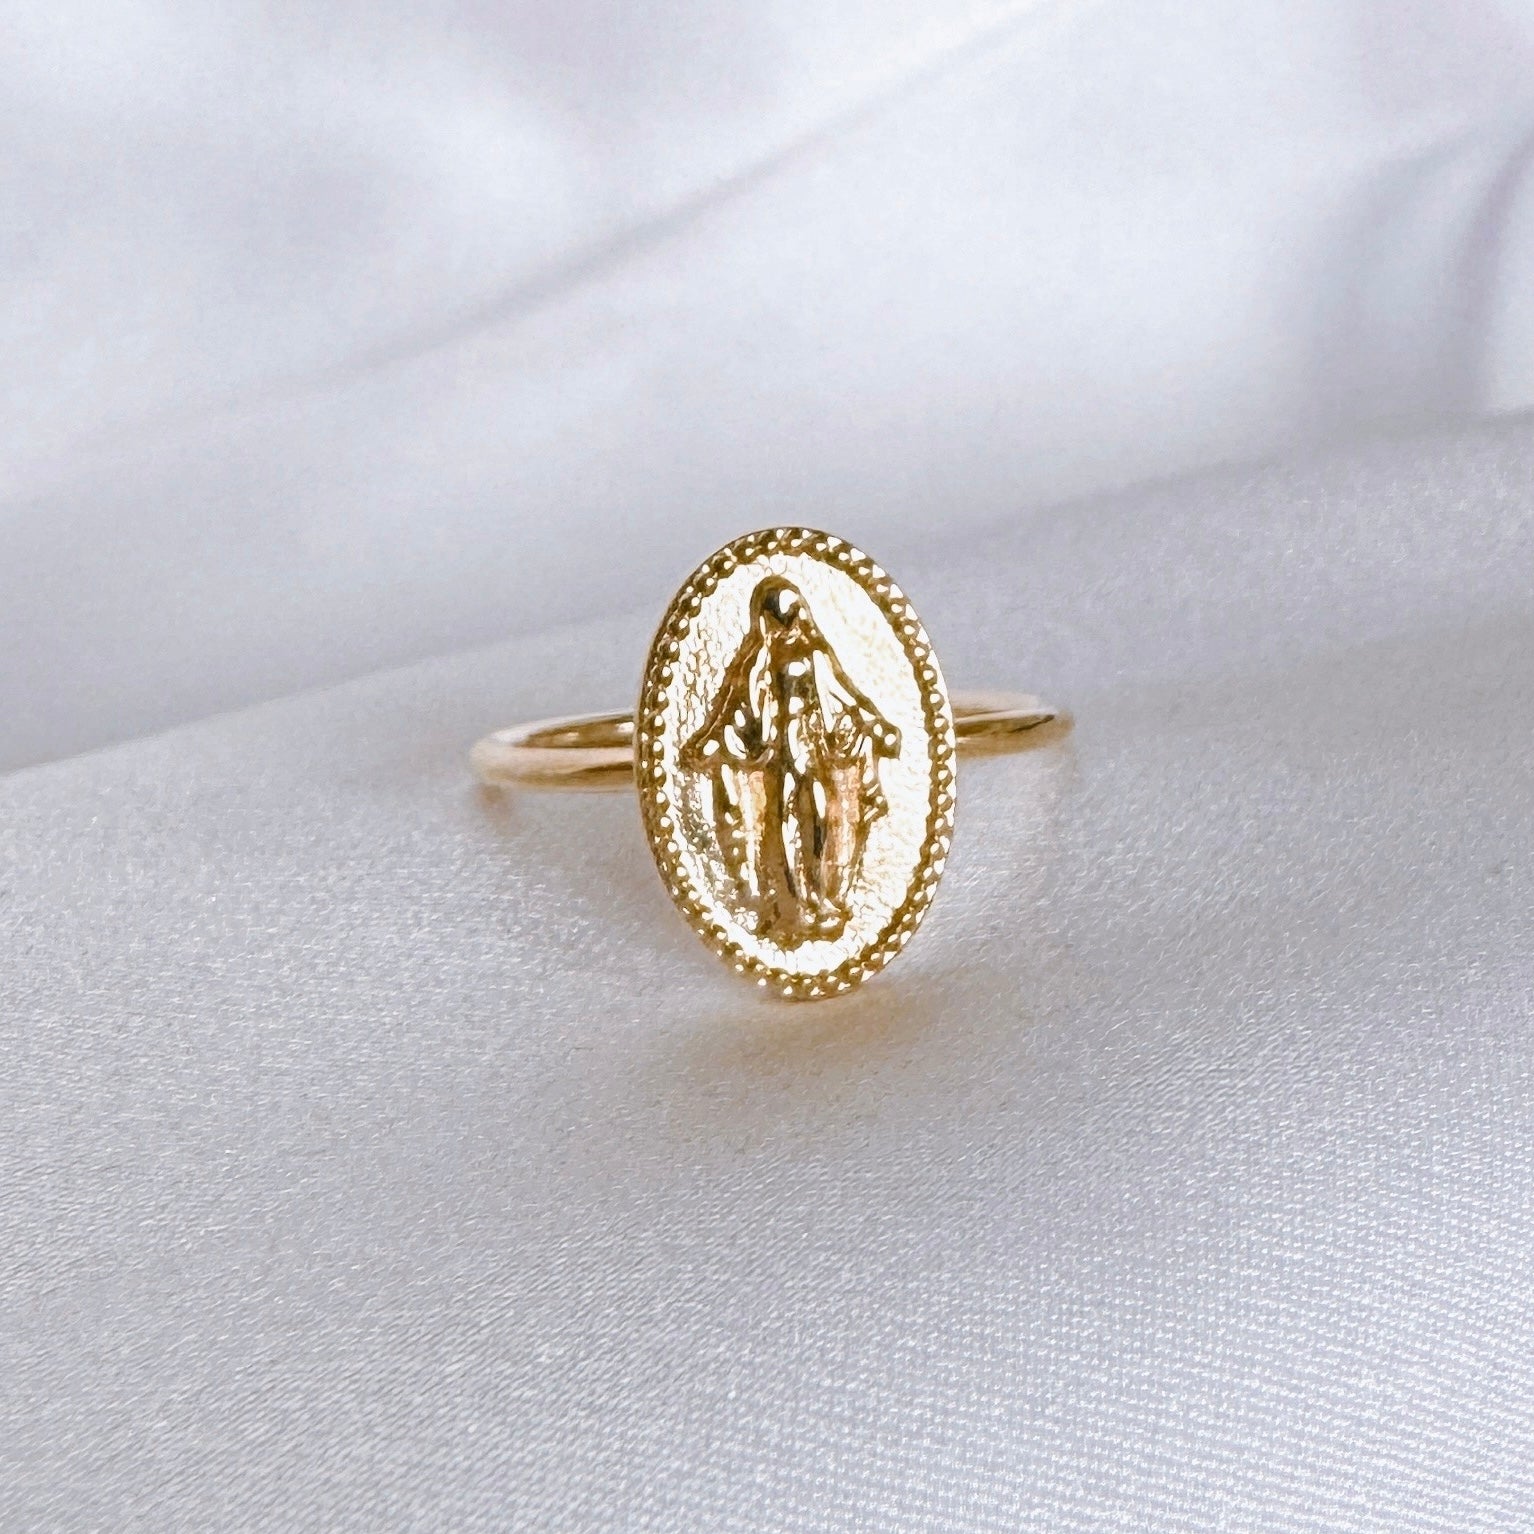 Gold-plated “Virgin Mary Medal” ring